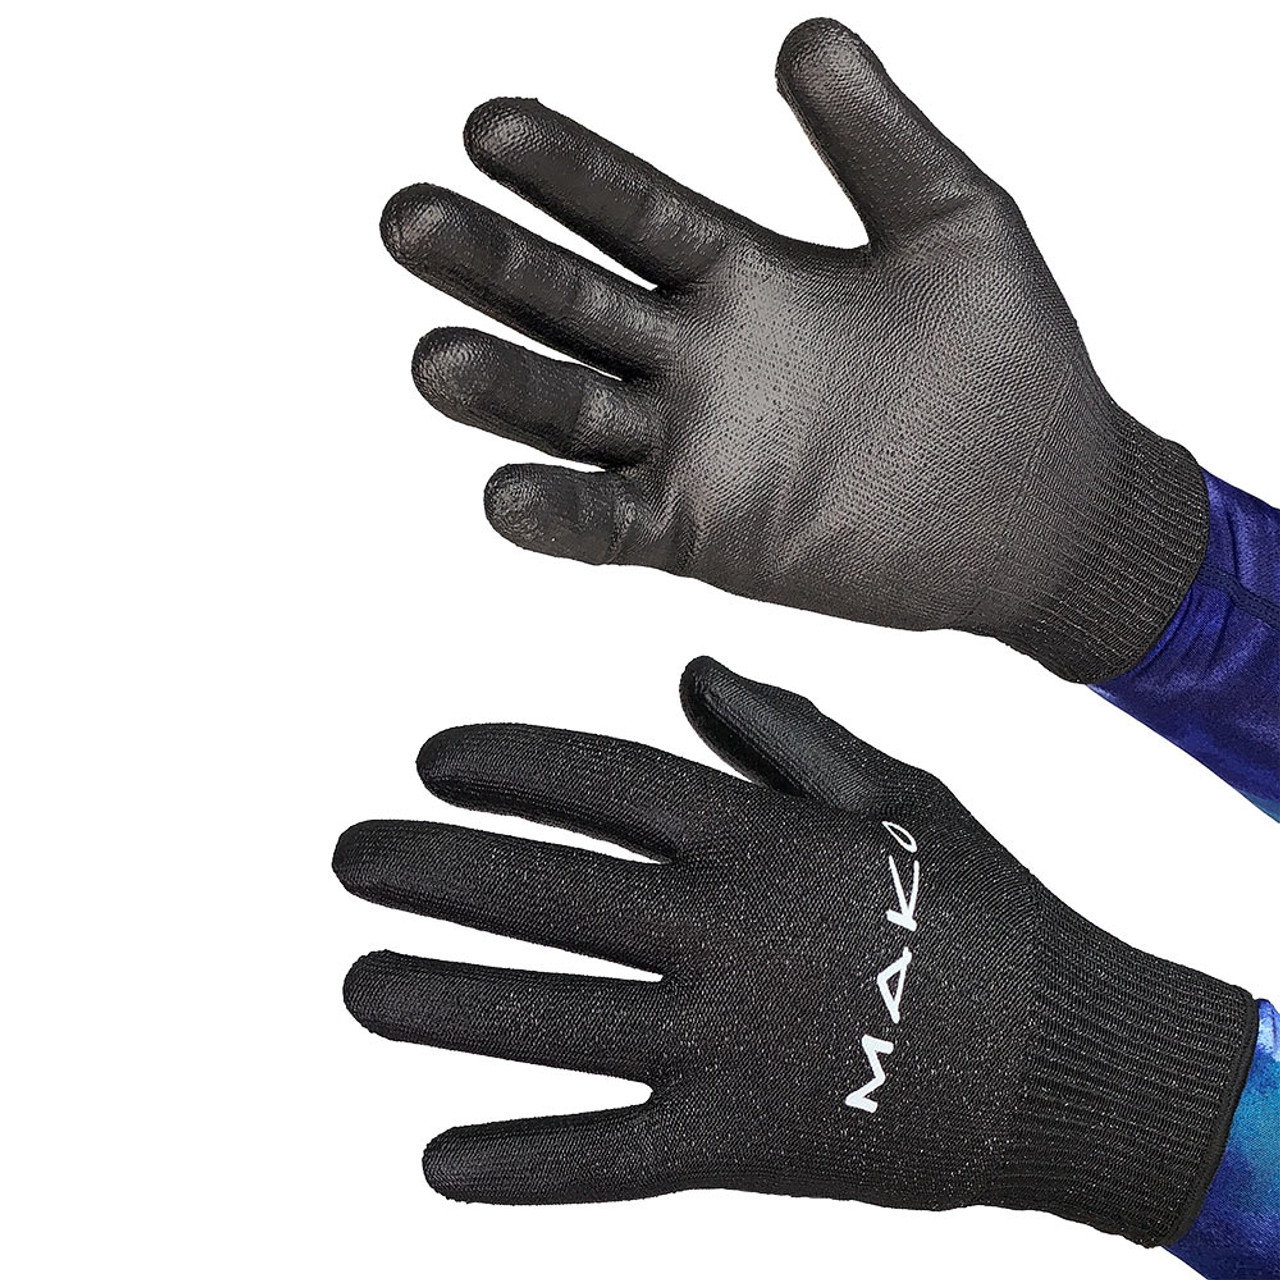 Spearfishing Gloves - Puncture Resistant/Level 5 Cut Resistant